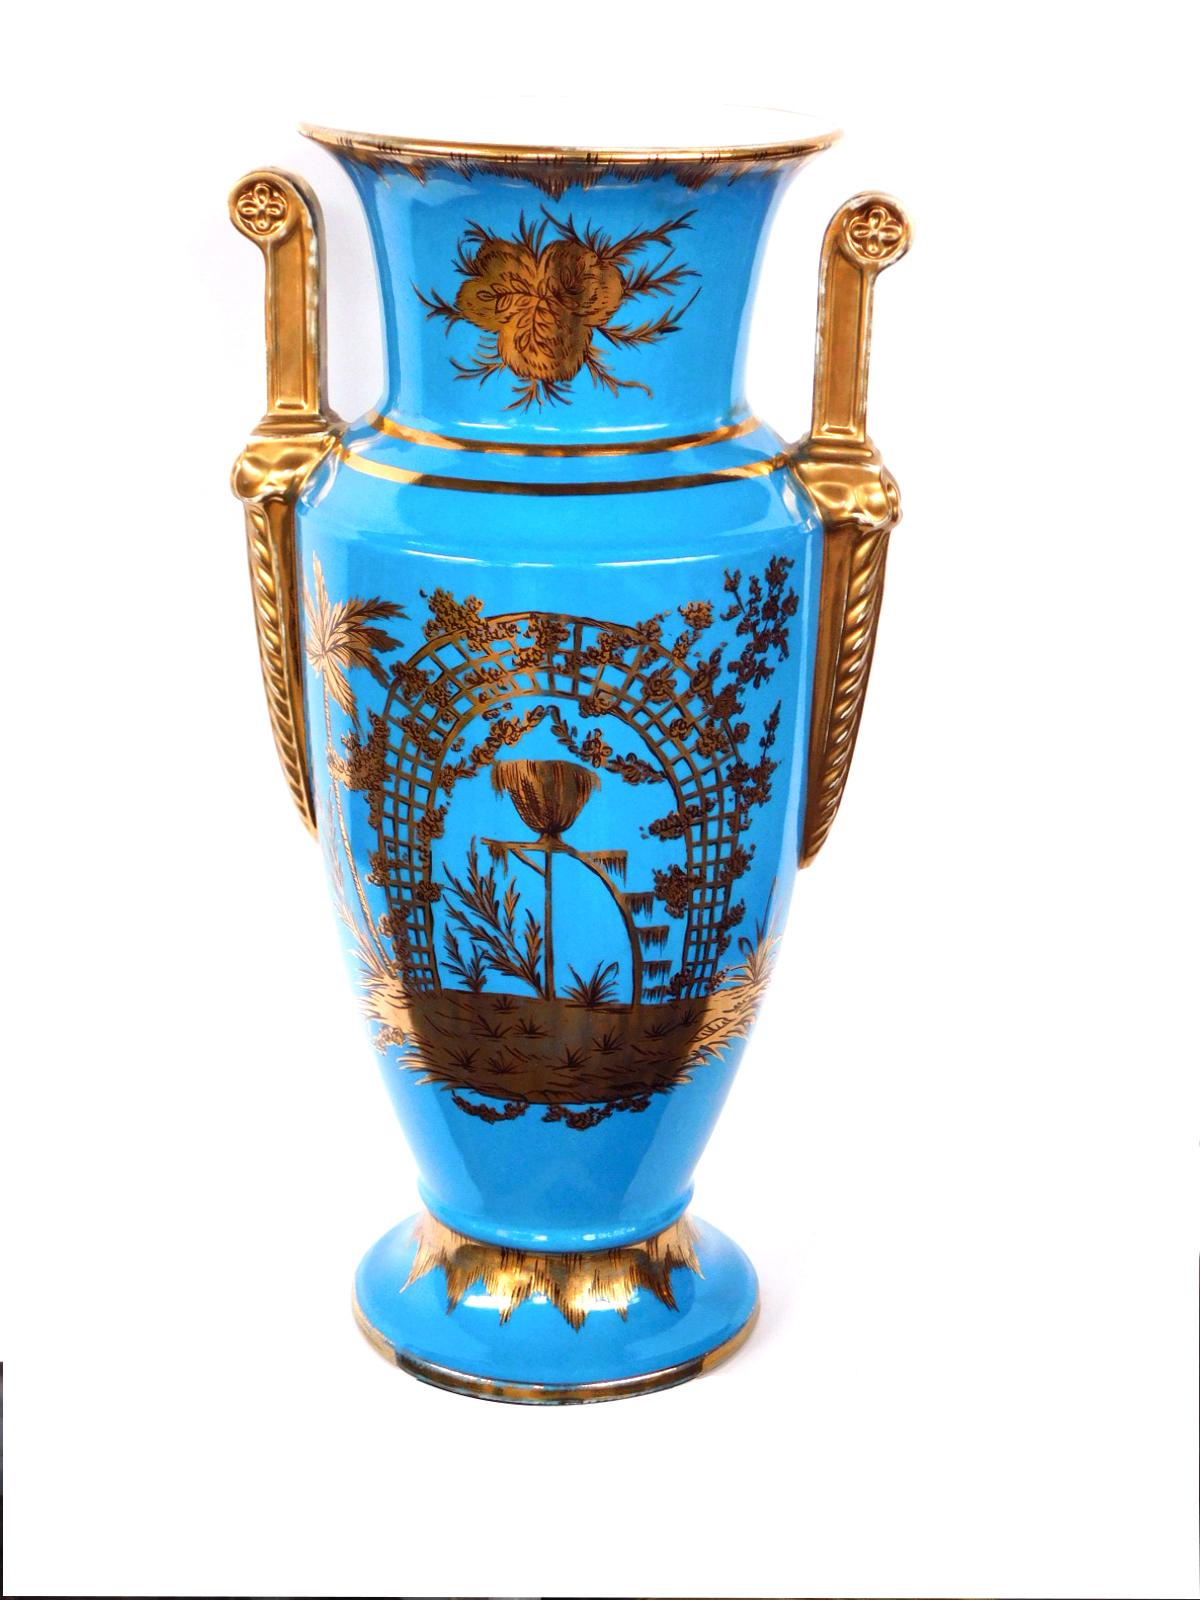 19th Century Pair of Empire Style Cerulean-Glazed Porcelain Vases with Chinoiserie Motifs